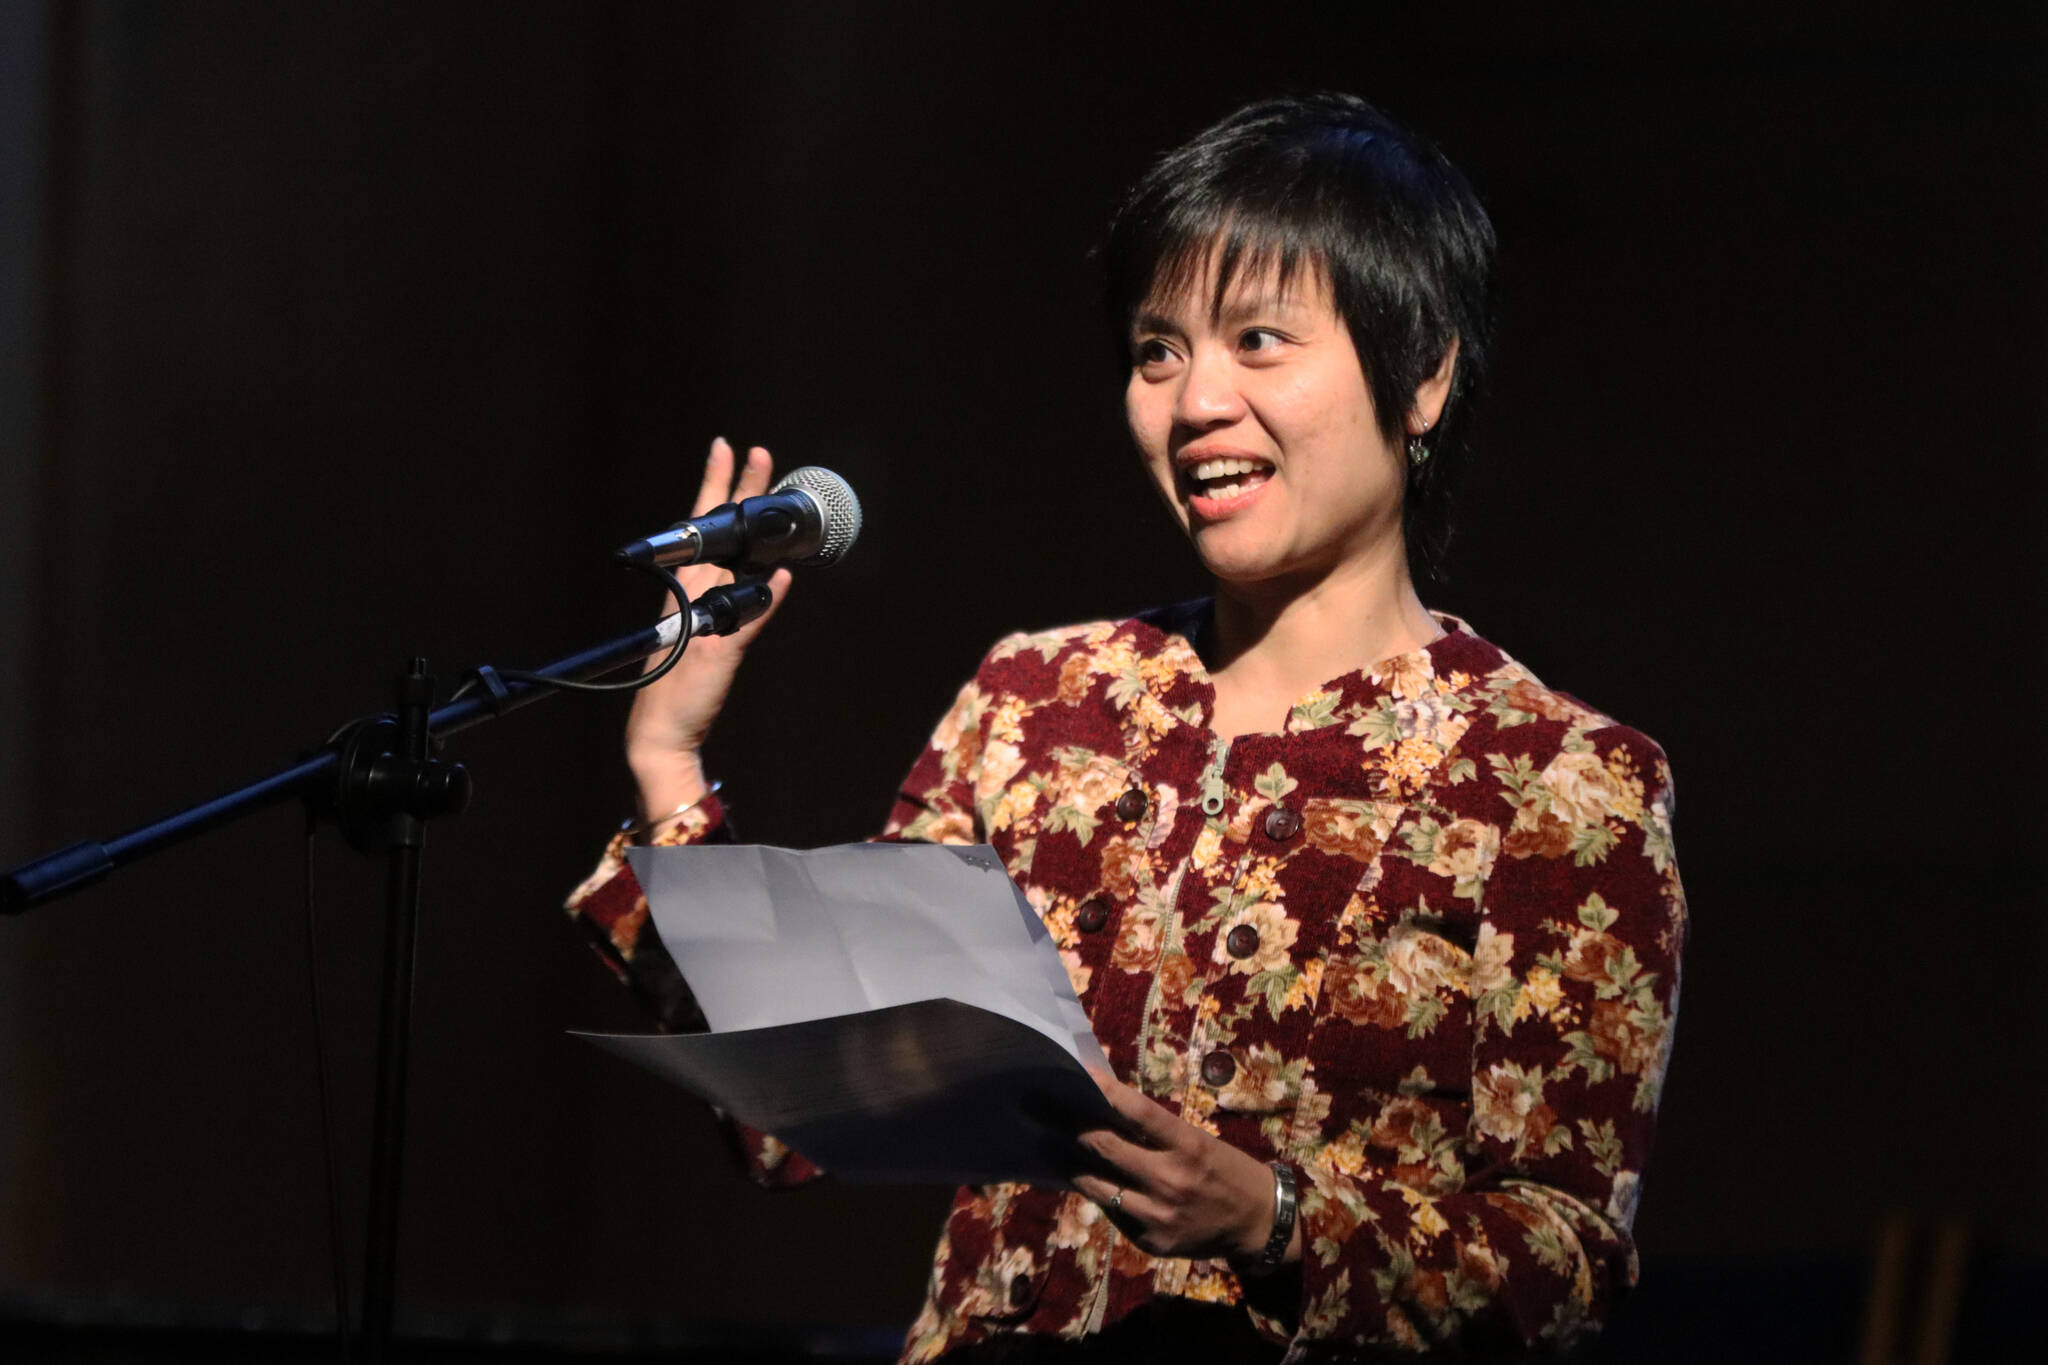 UAS assistant professor Nguyet Nguyen delivers a heartbreaking story from her childhood as part of Mudrooms closing event for the season on Tuesday night at Ḵunéix̱ Hídi Northern Light United Church. (Jonson Kuhn / Juneau Empire)